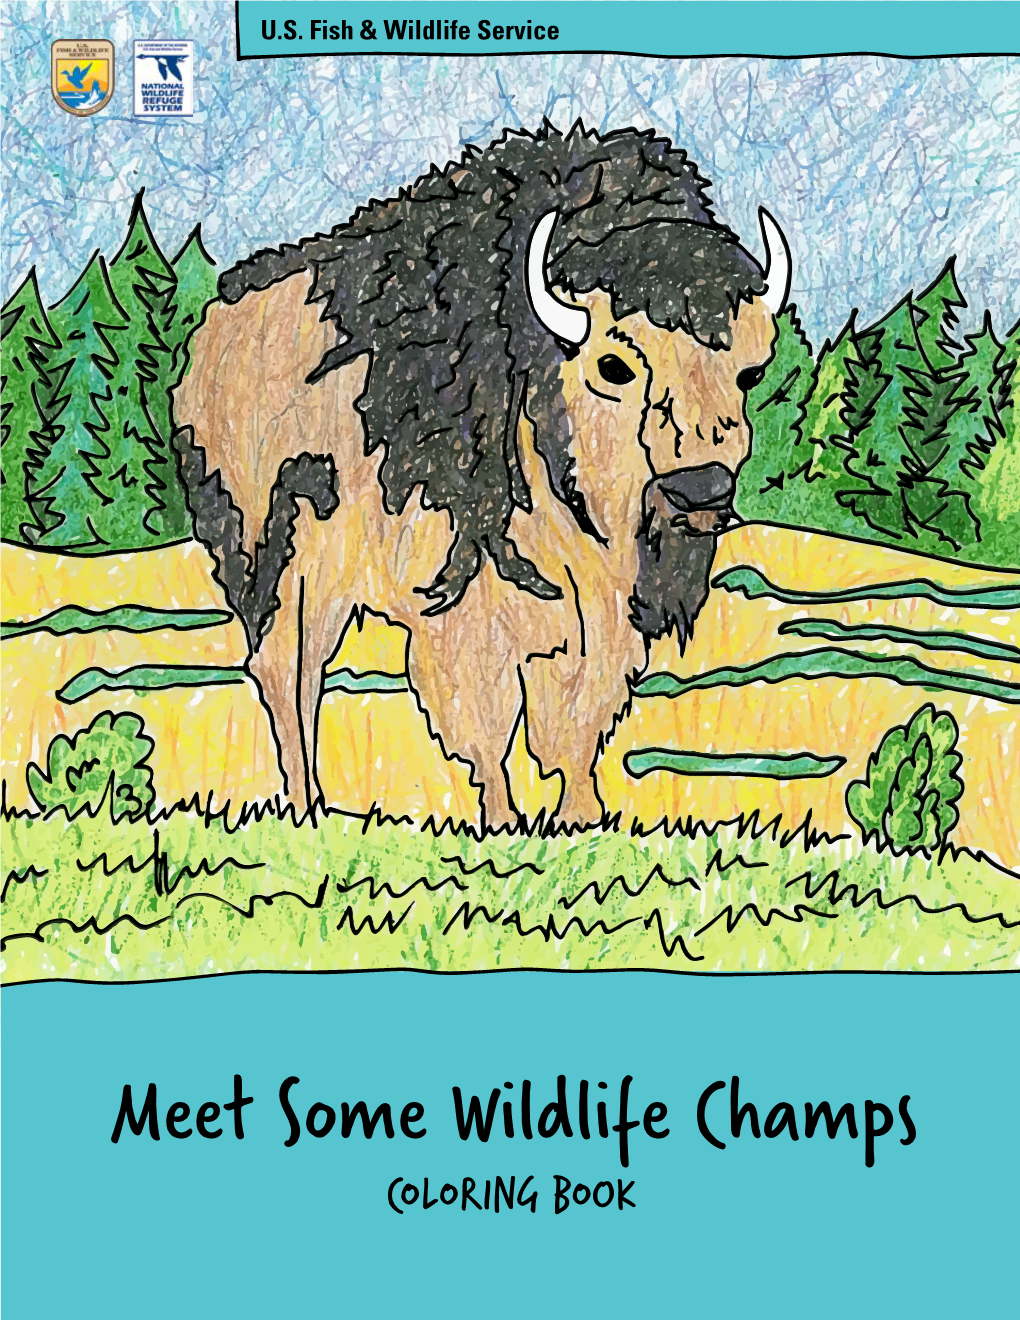 Meet Some Wildlife Champs COLORING BOOK Which Animal Has the Thickest Fur?